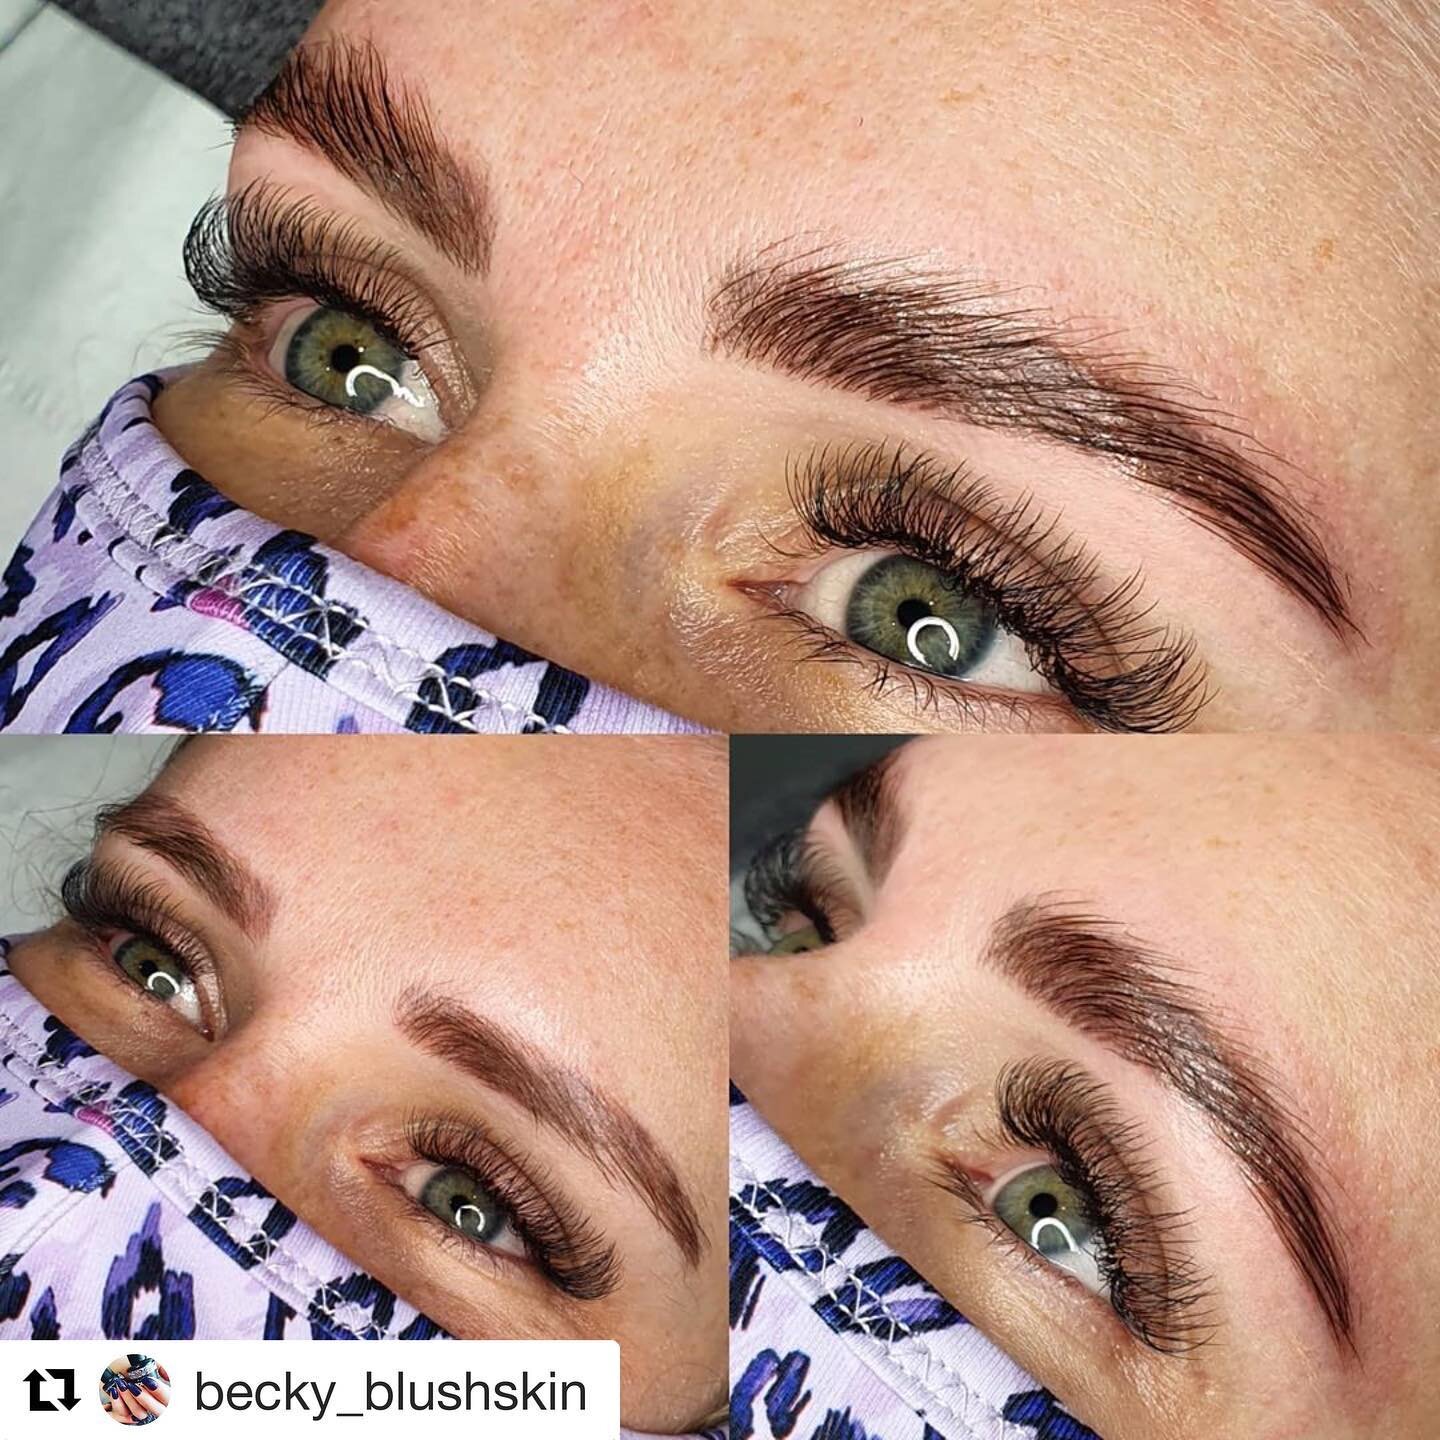 HD Brow Sculpt by Becky 🤍
Tatti Hybrid Lashes by Katlyn 🤍

#Repost @becky_blushskin with @get_repost

When you get to work on these after 6 months! #hdbrowsculpt #browboss #lamination #blushbeauty #holmfirth #huddersfield #hdbrows #brows #microblad